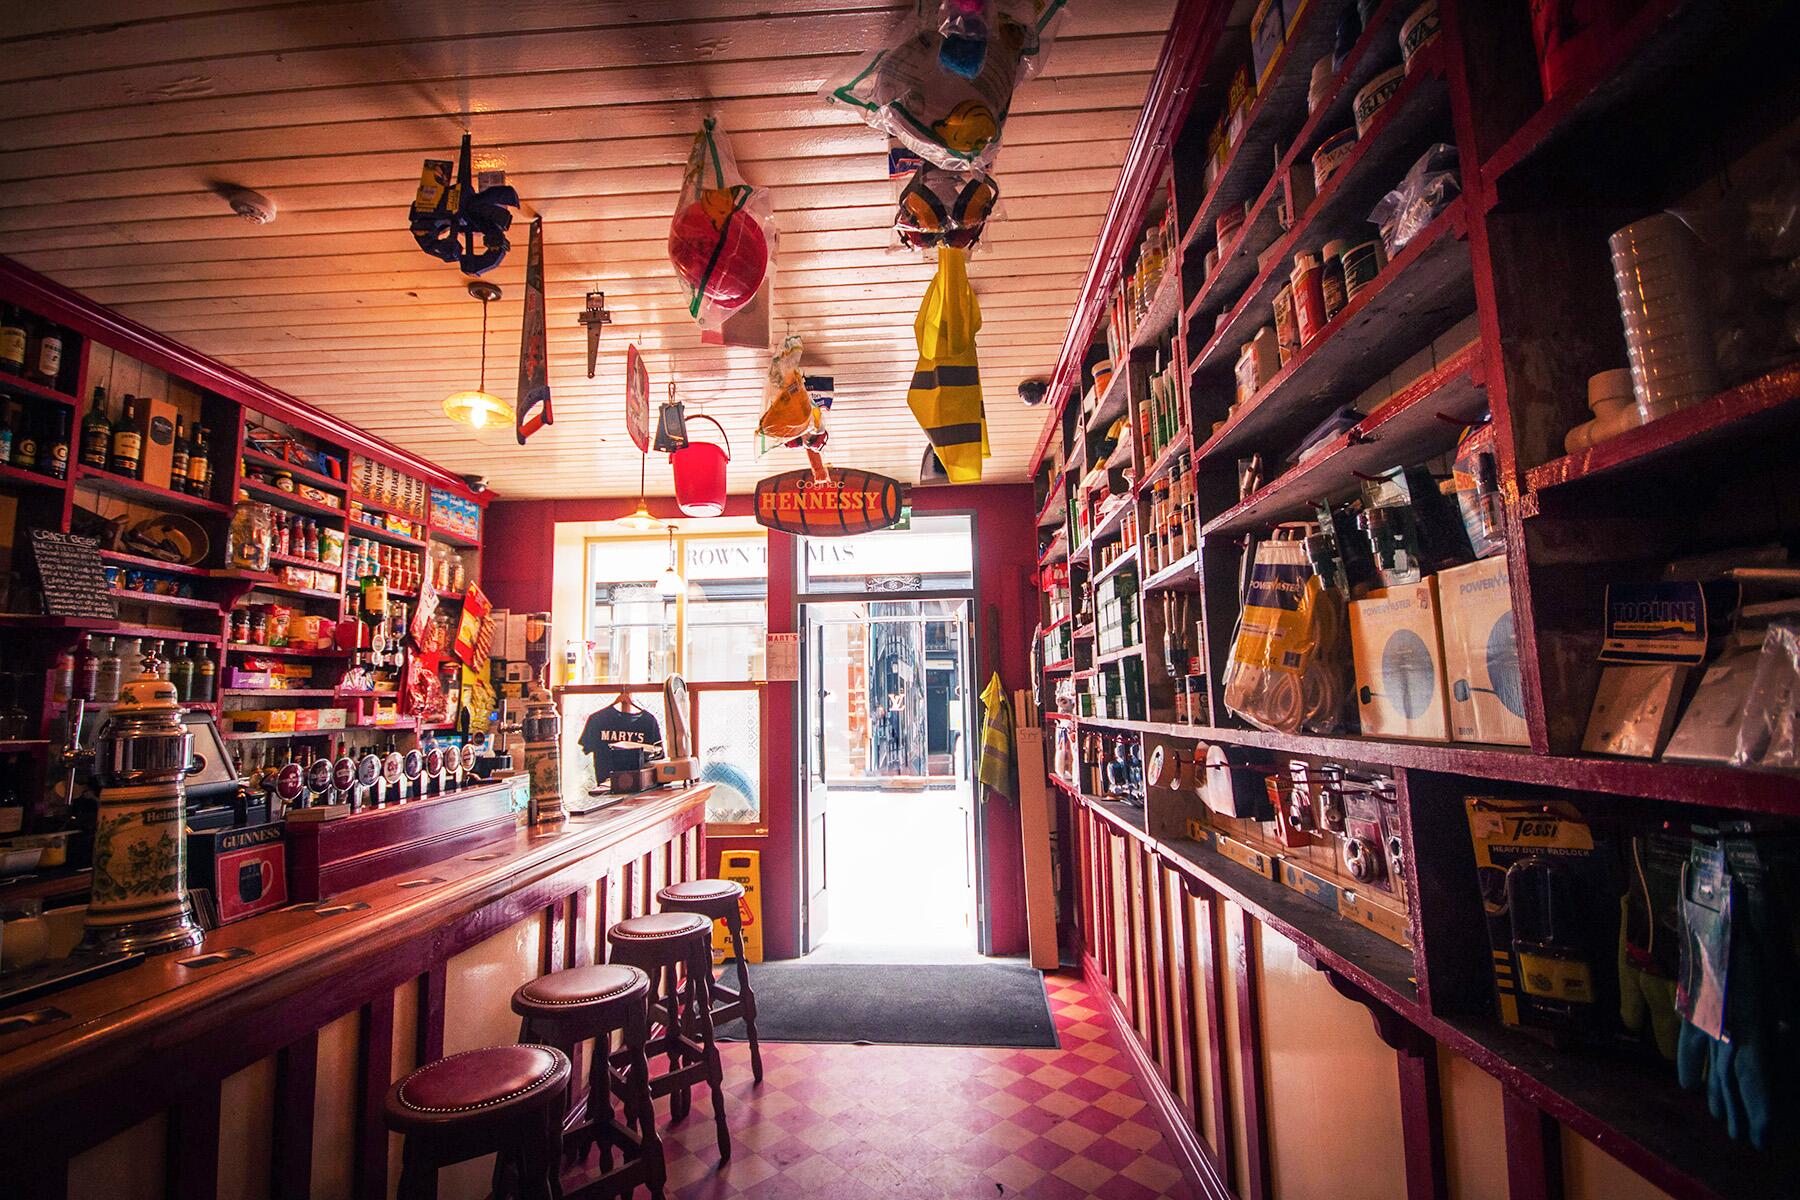 <a href='https://www.fodors.com/world/europe/ireland/dublin/experiences/news/photos/where-to-find-the-best-pubs-in-dublin#'>From &quot;The Best Pubs in Dublin, According to Locals:  Mary’s Bar & Hardware &quot;</a>